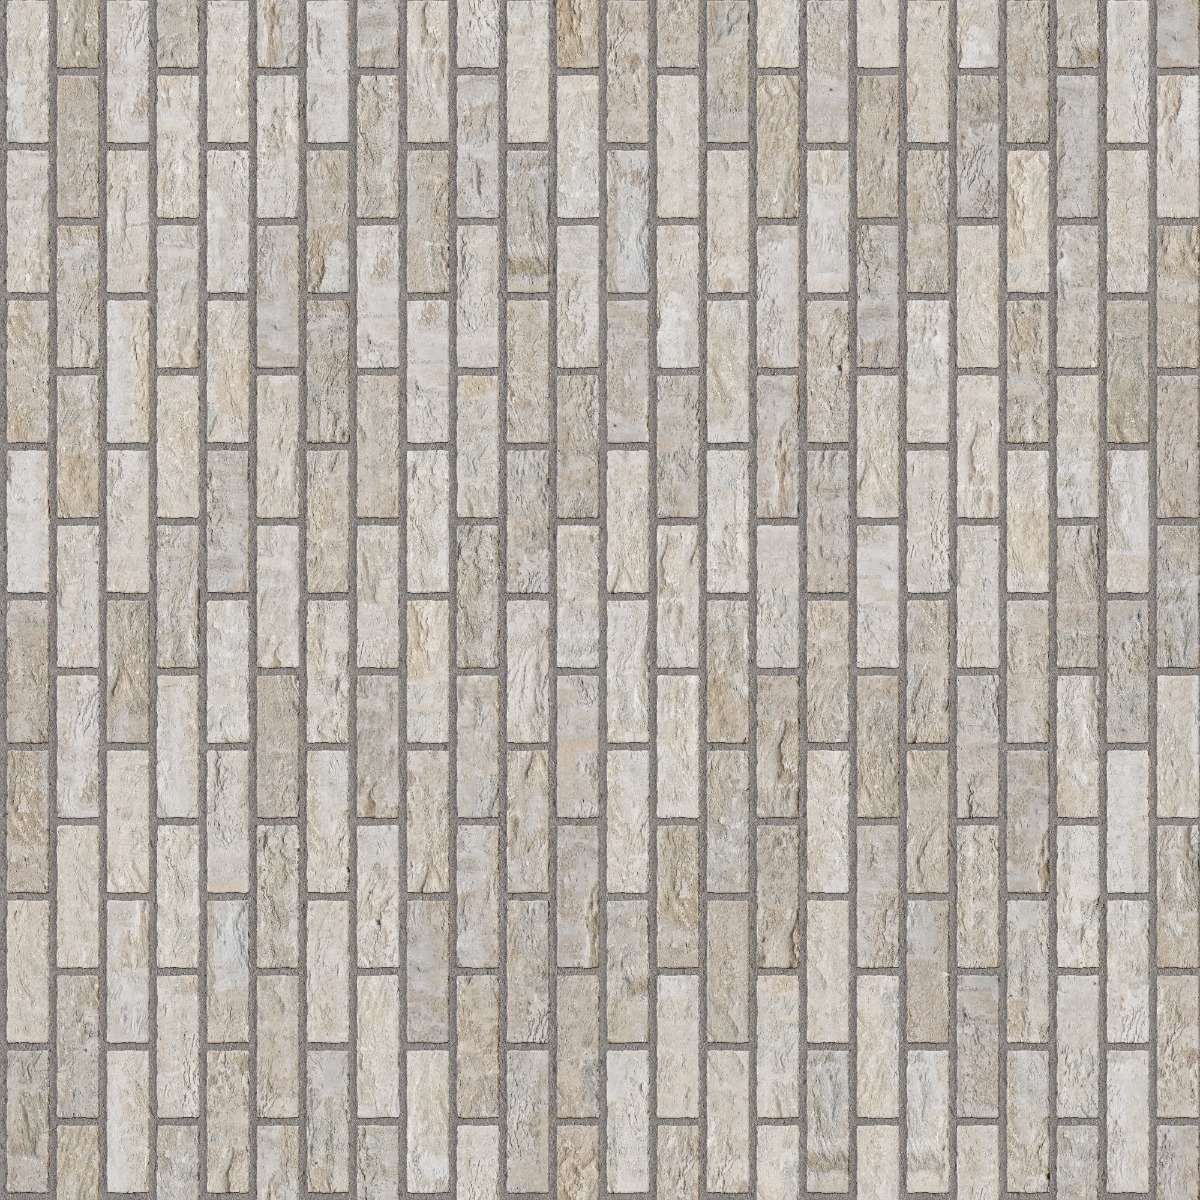 A seamless brick texture with buff units arranged in a Stretcher pattern